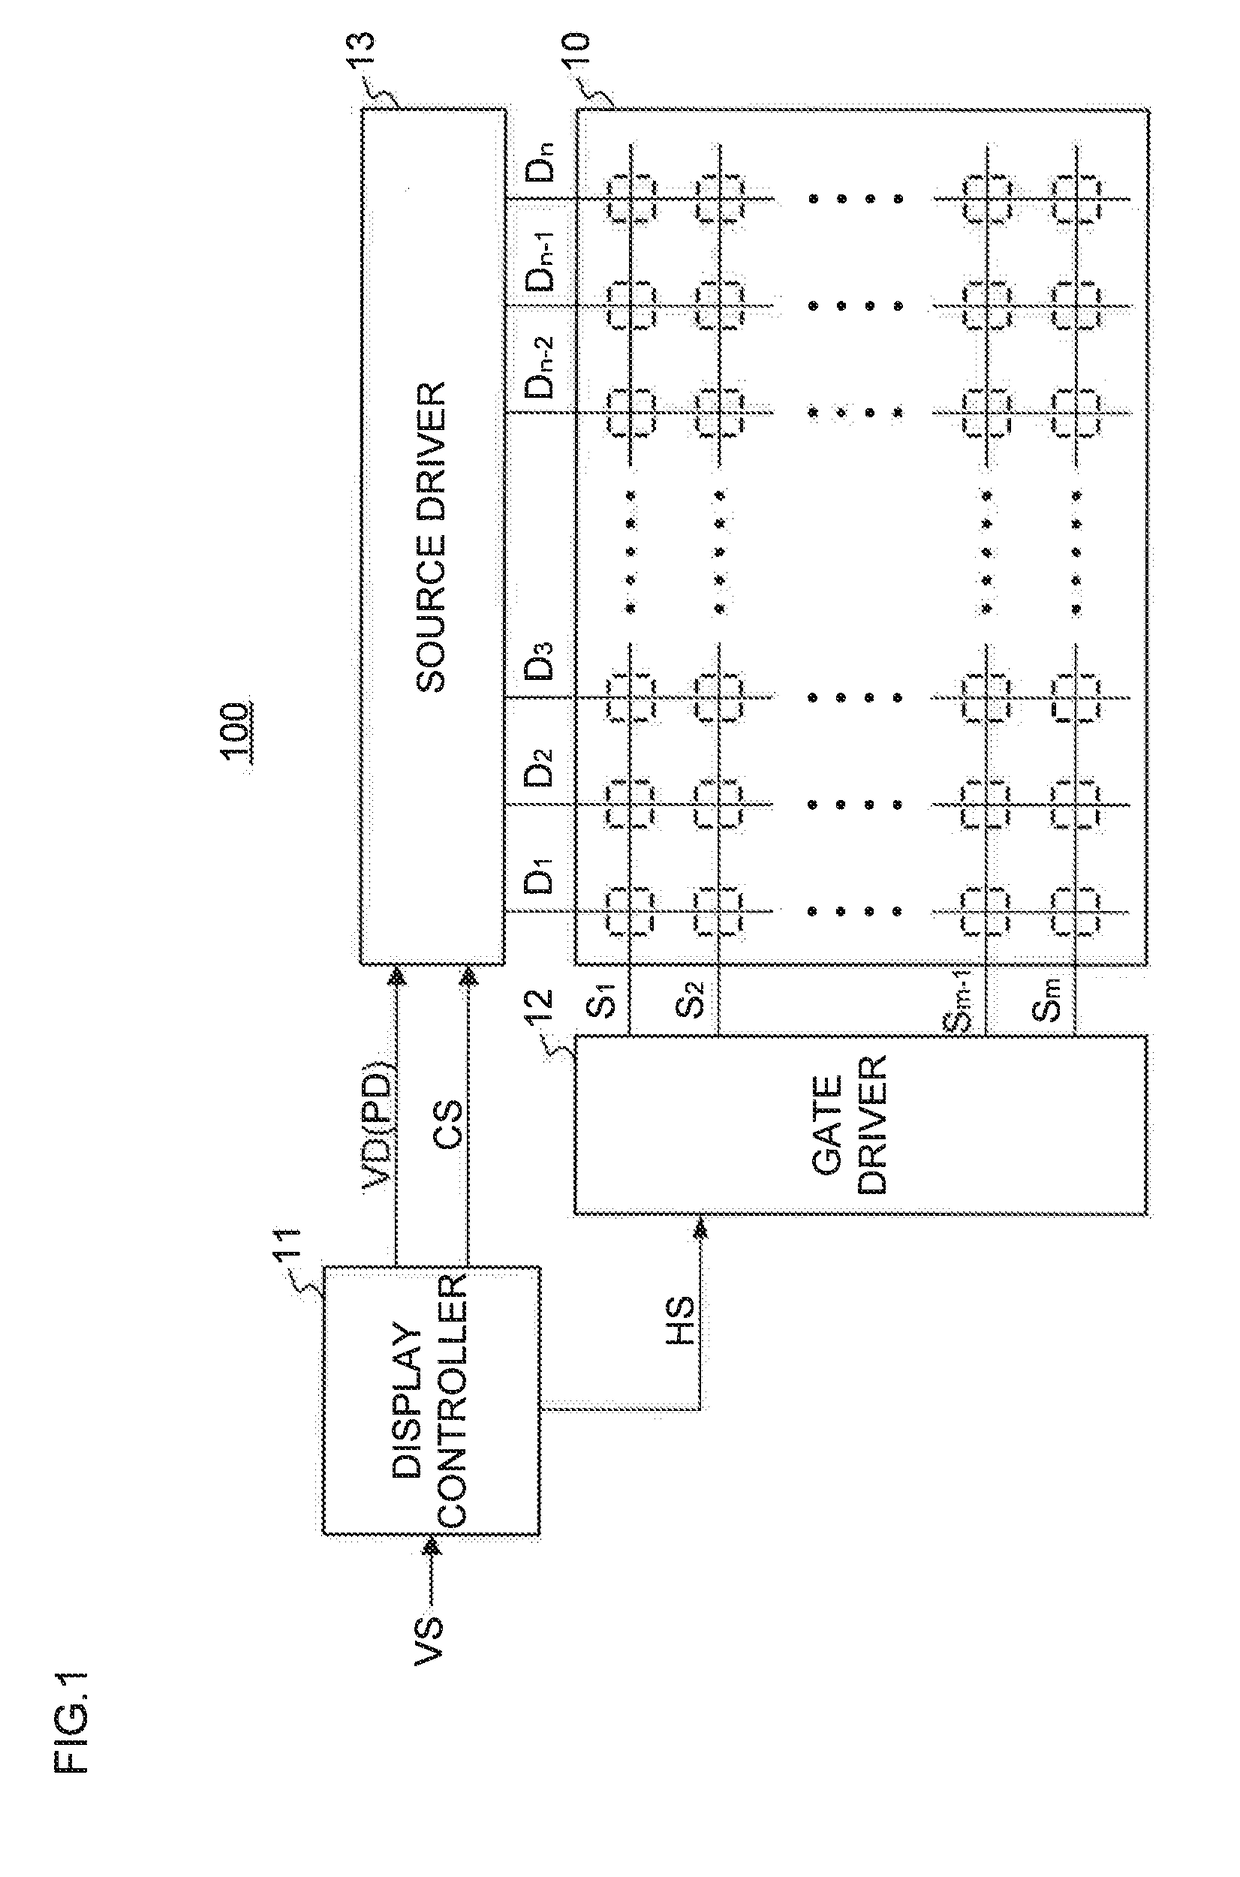 Output amplifier and display driver